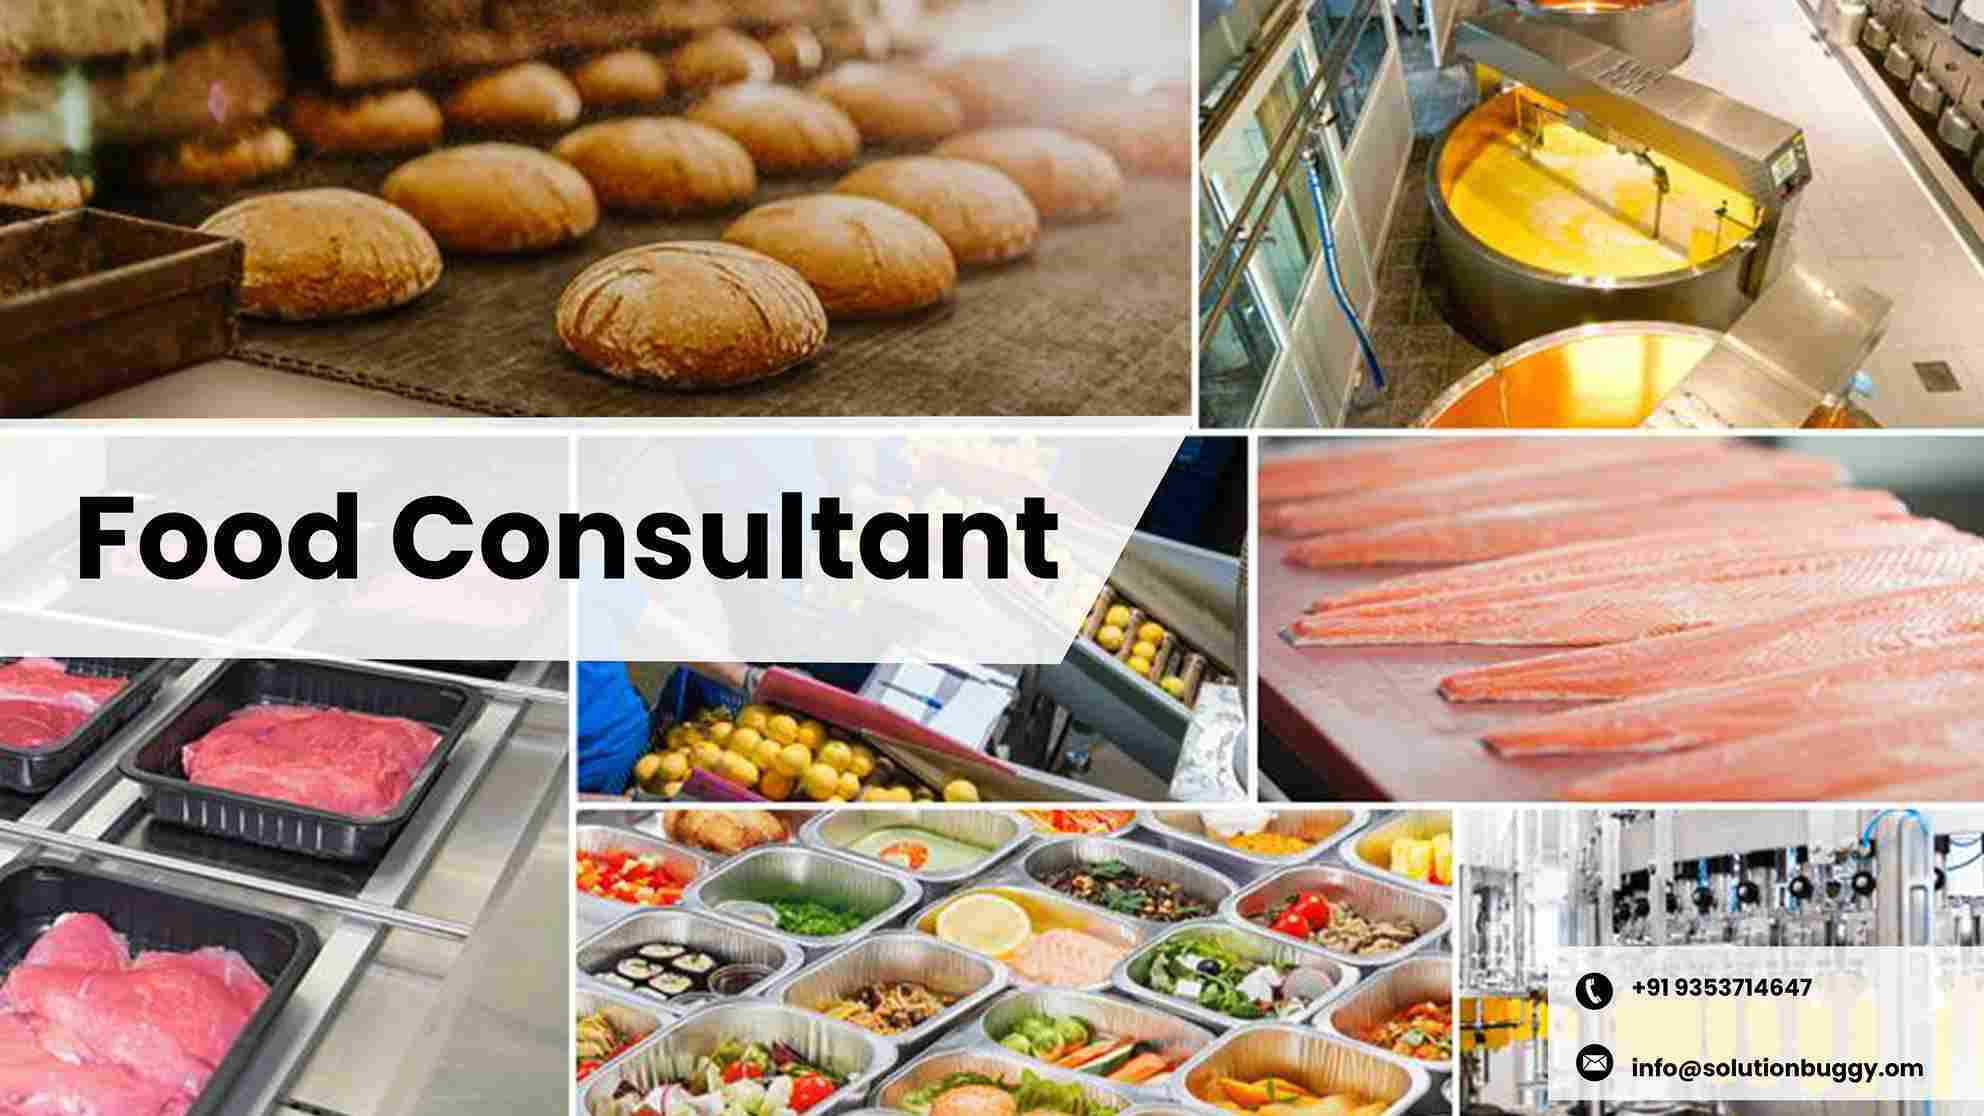 Connect with Top Food Consultants at SolutionBuggy